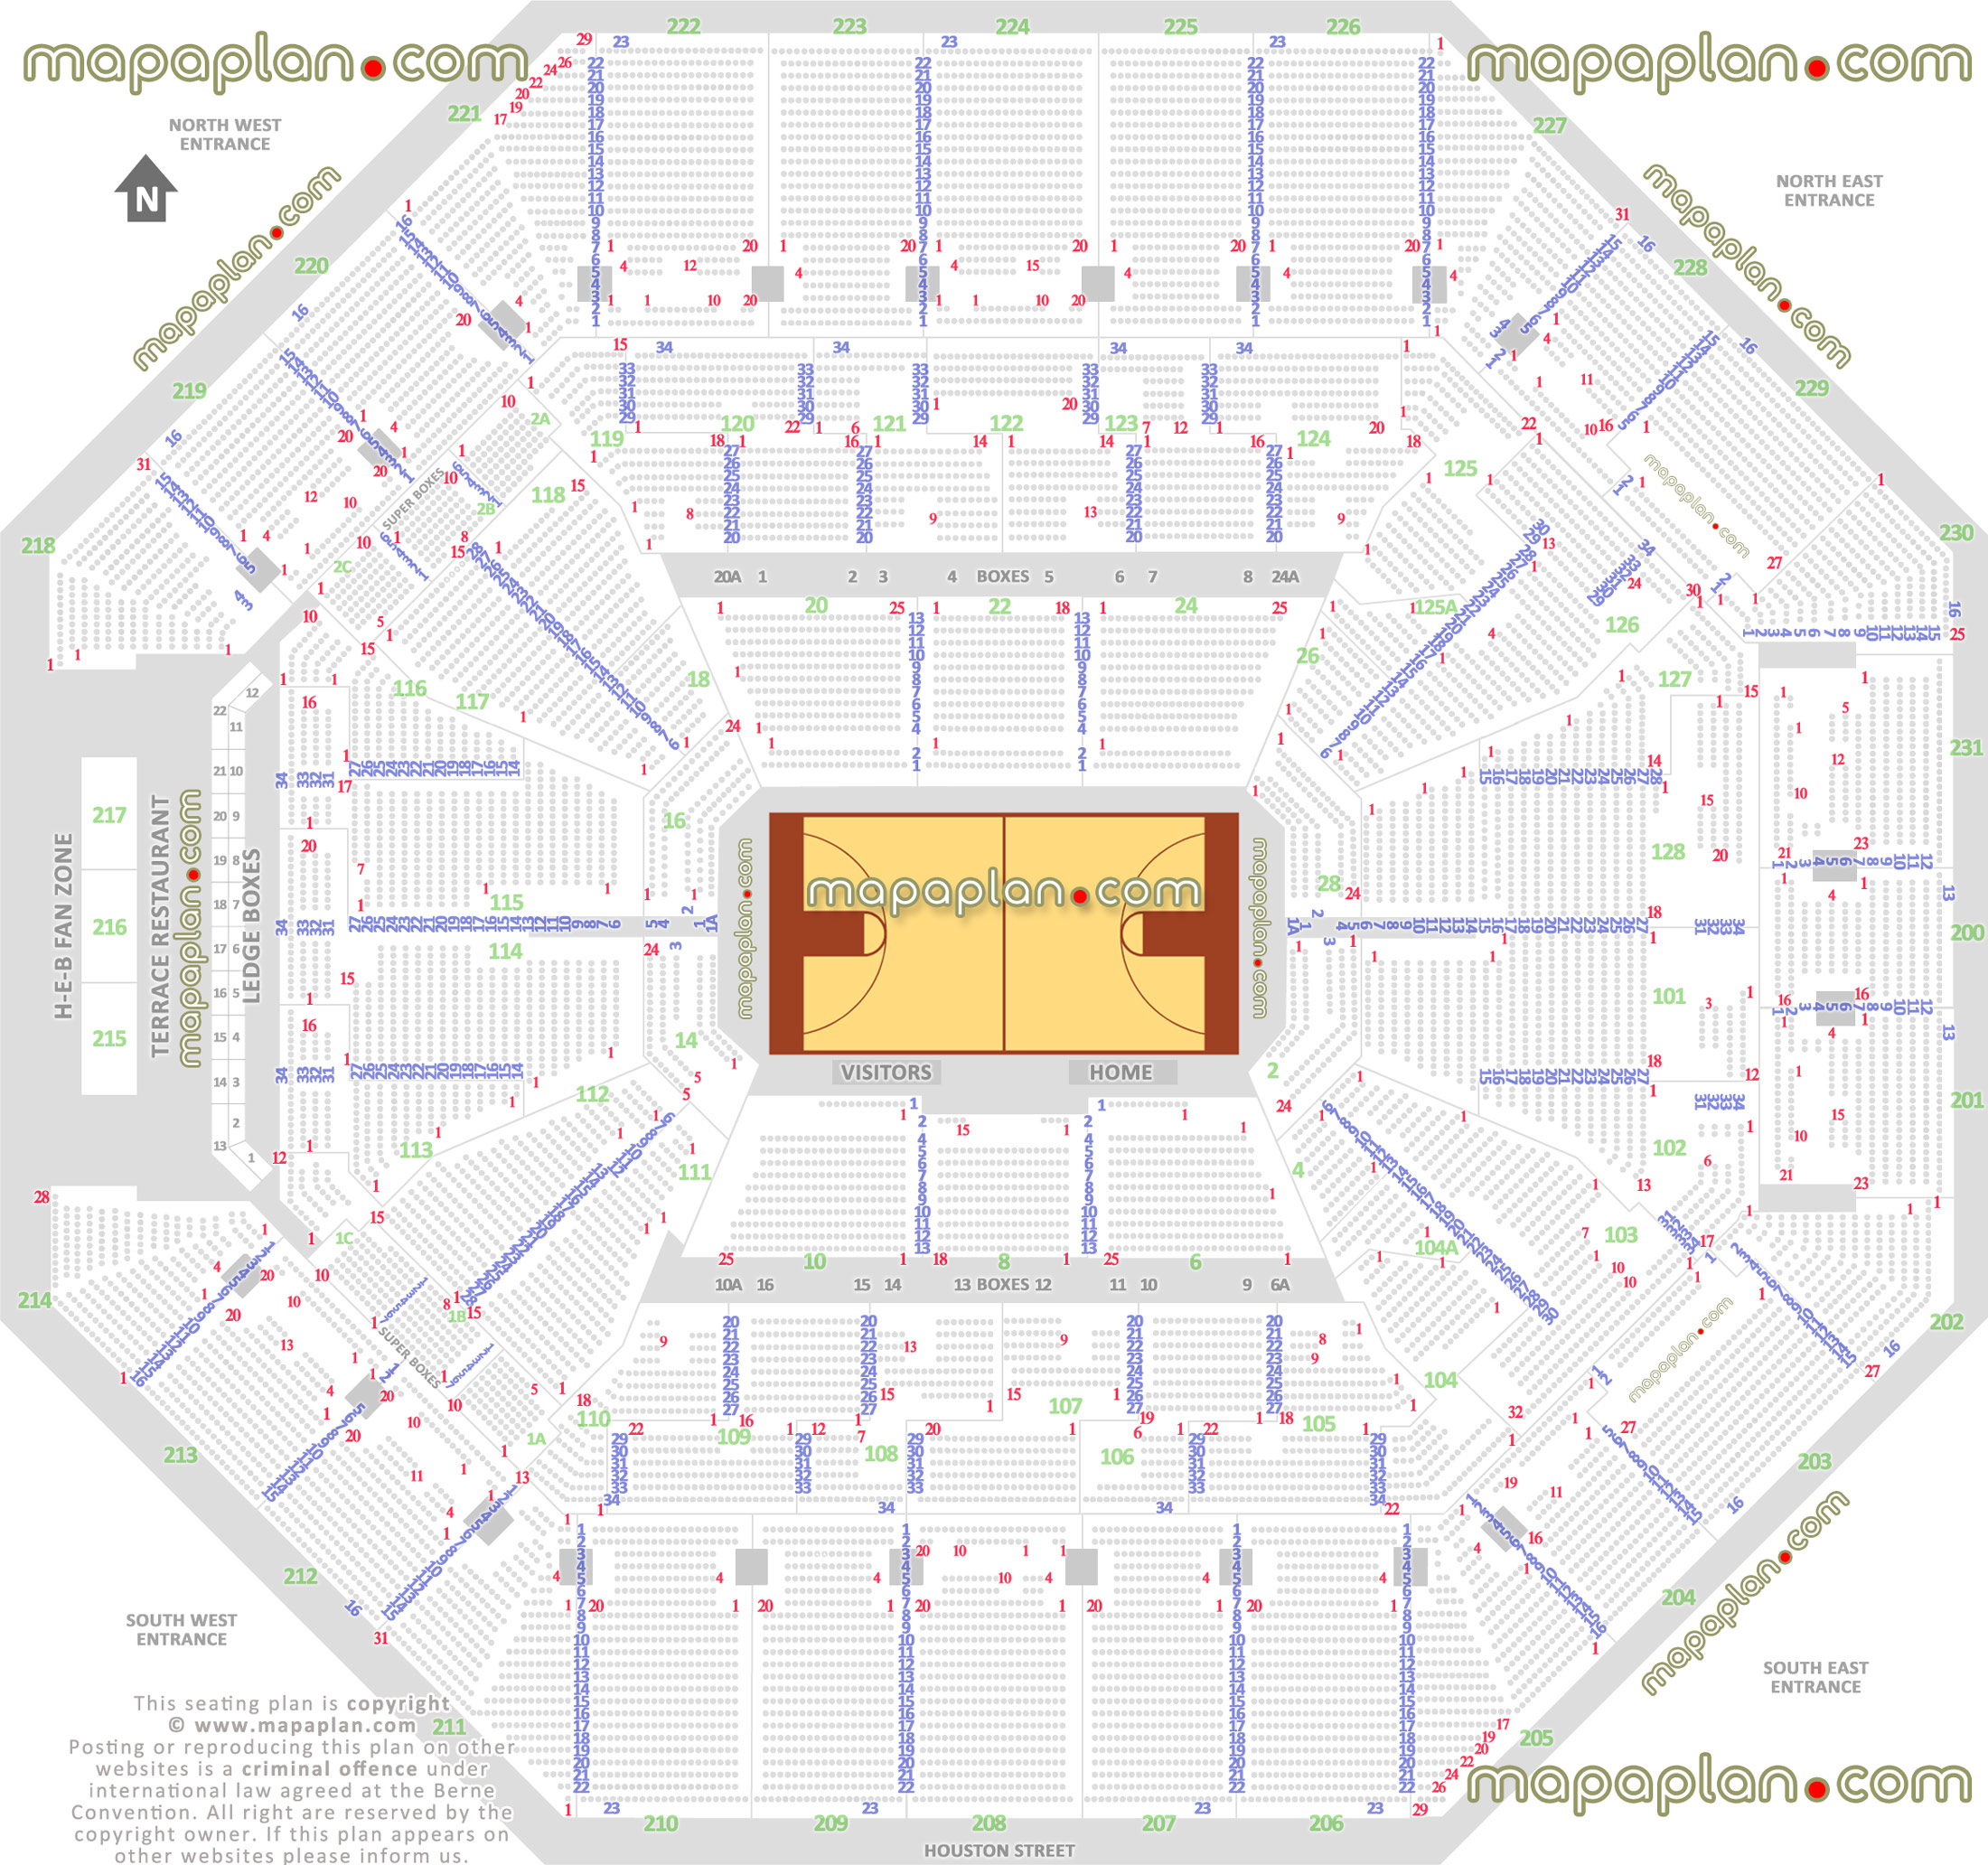 san antonio spurs basketball game arena stadium diagram individual find seat locator how many seats row how seats rows numbered courtside sections 2 4 6 8 10 12 14 16 18 20 22 24 26 28 San Antonio Frost Bank Center seating chart